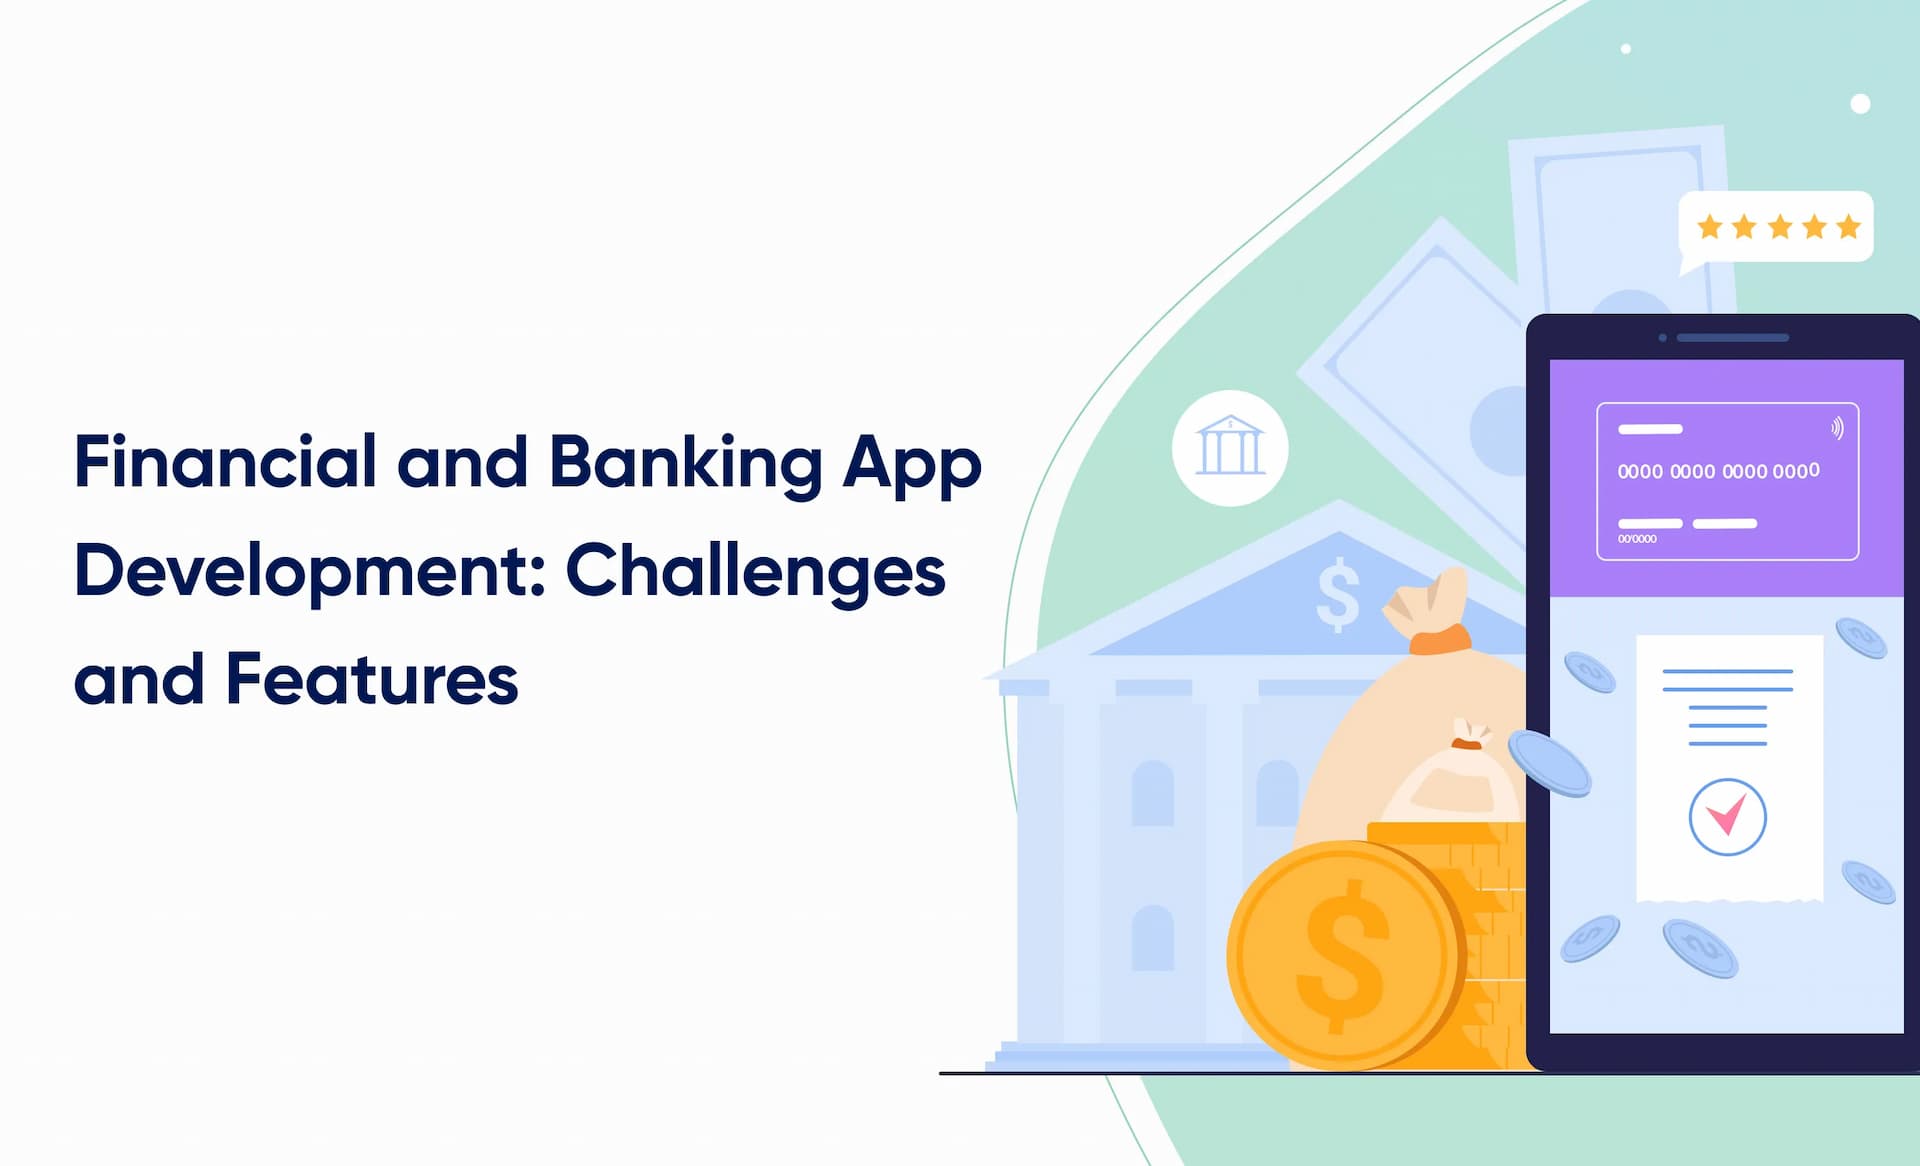 Financial and Banking App Development: Challenges and Features